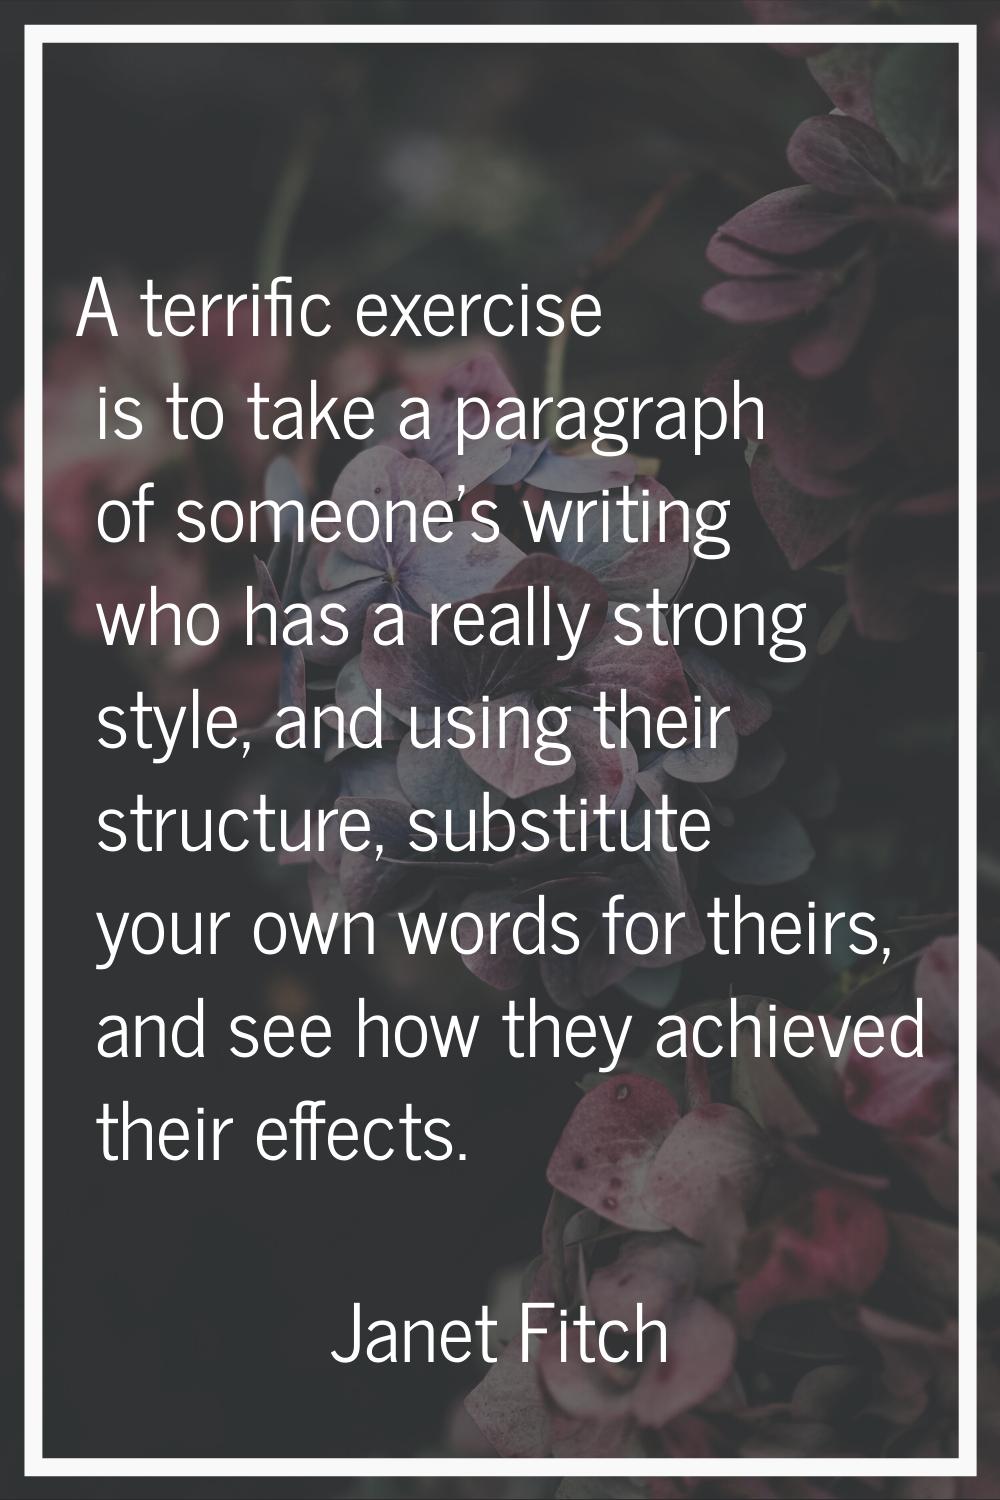 A terrific exercise is to take a paragraph of someone's writing who has a really strong style, and 